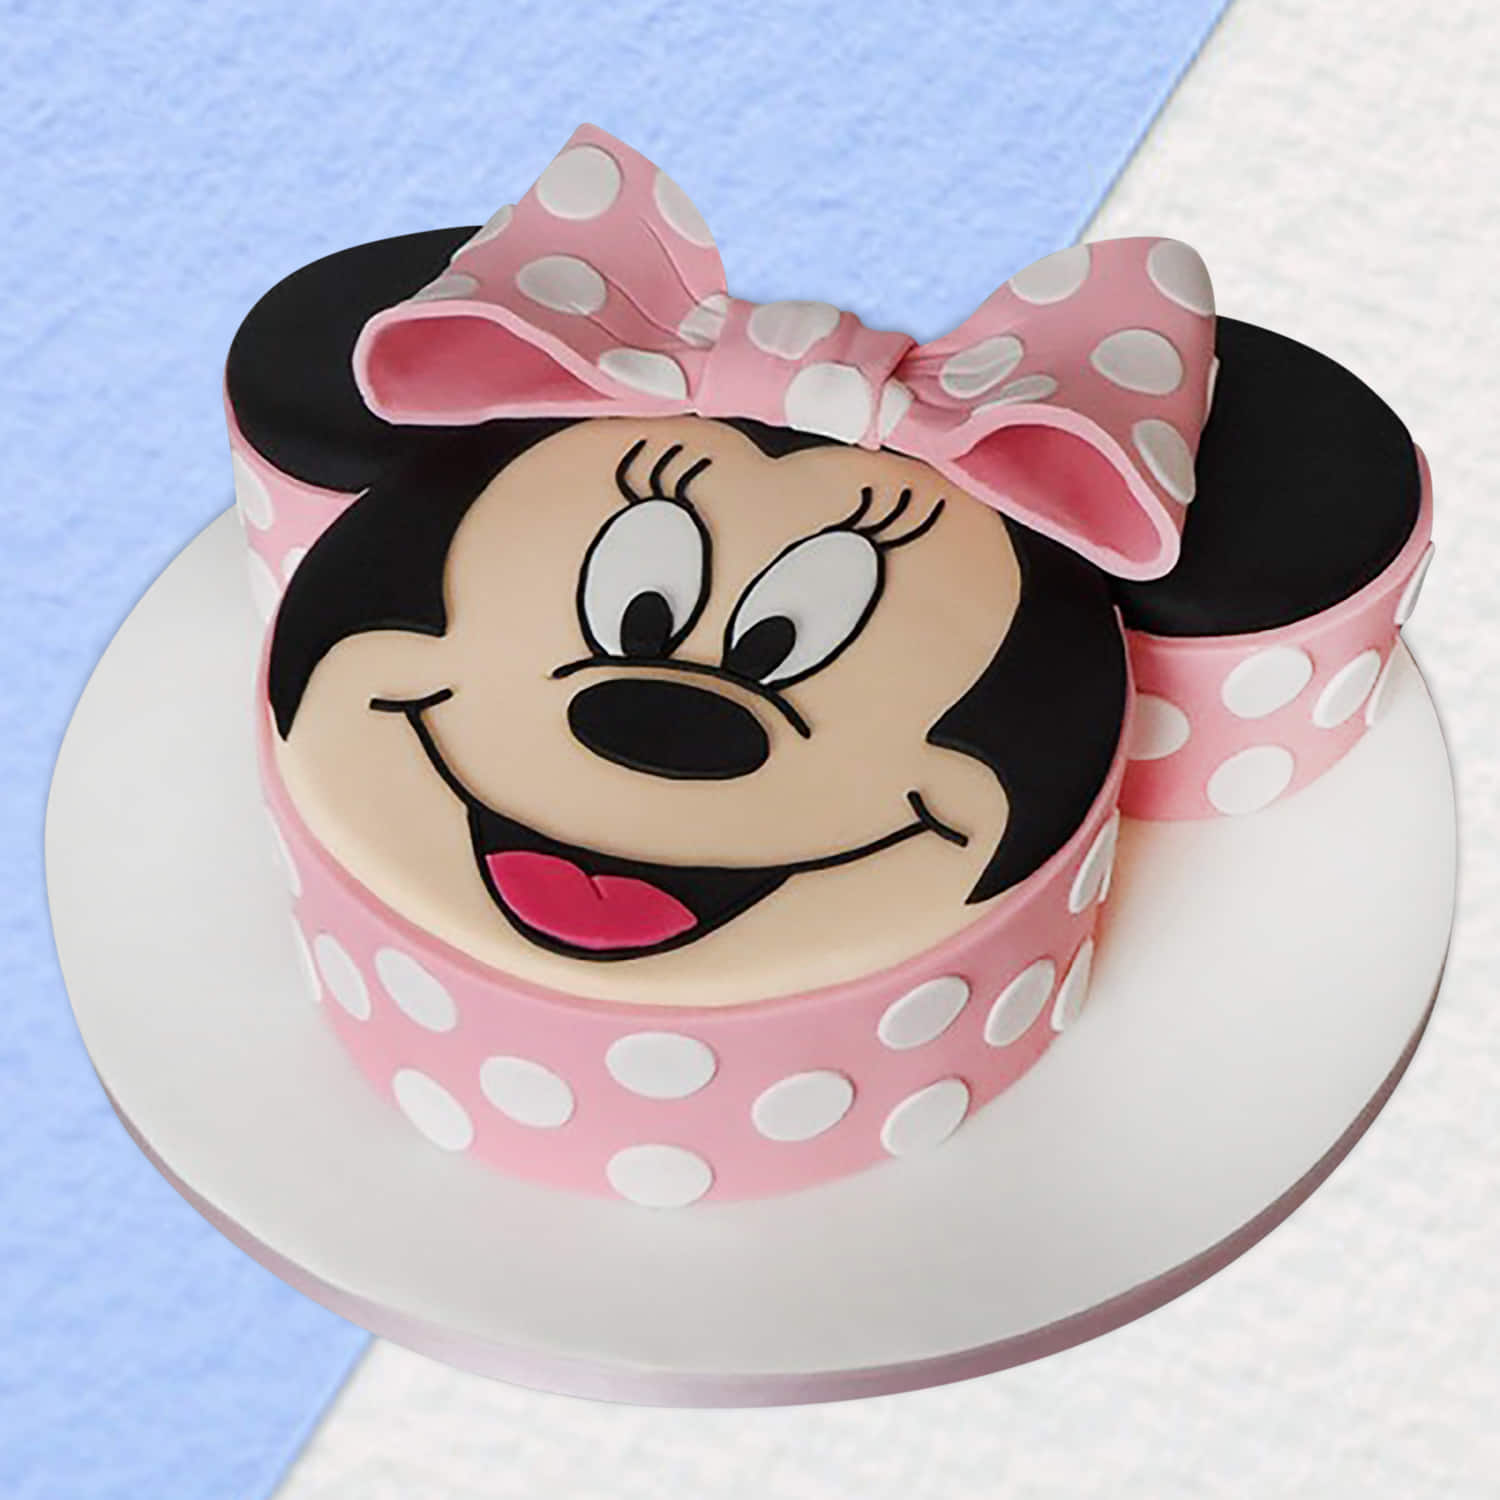 Buy Minnie mouse fondant designer cake online at the best price